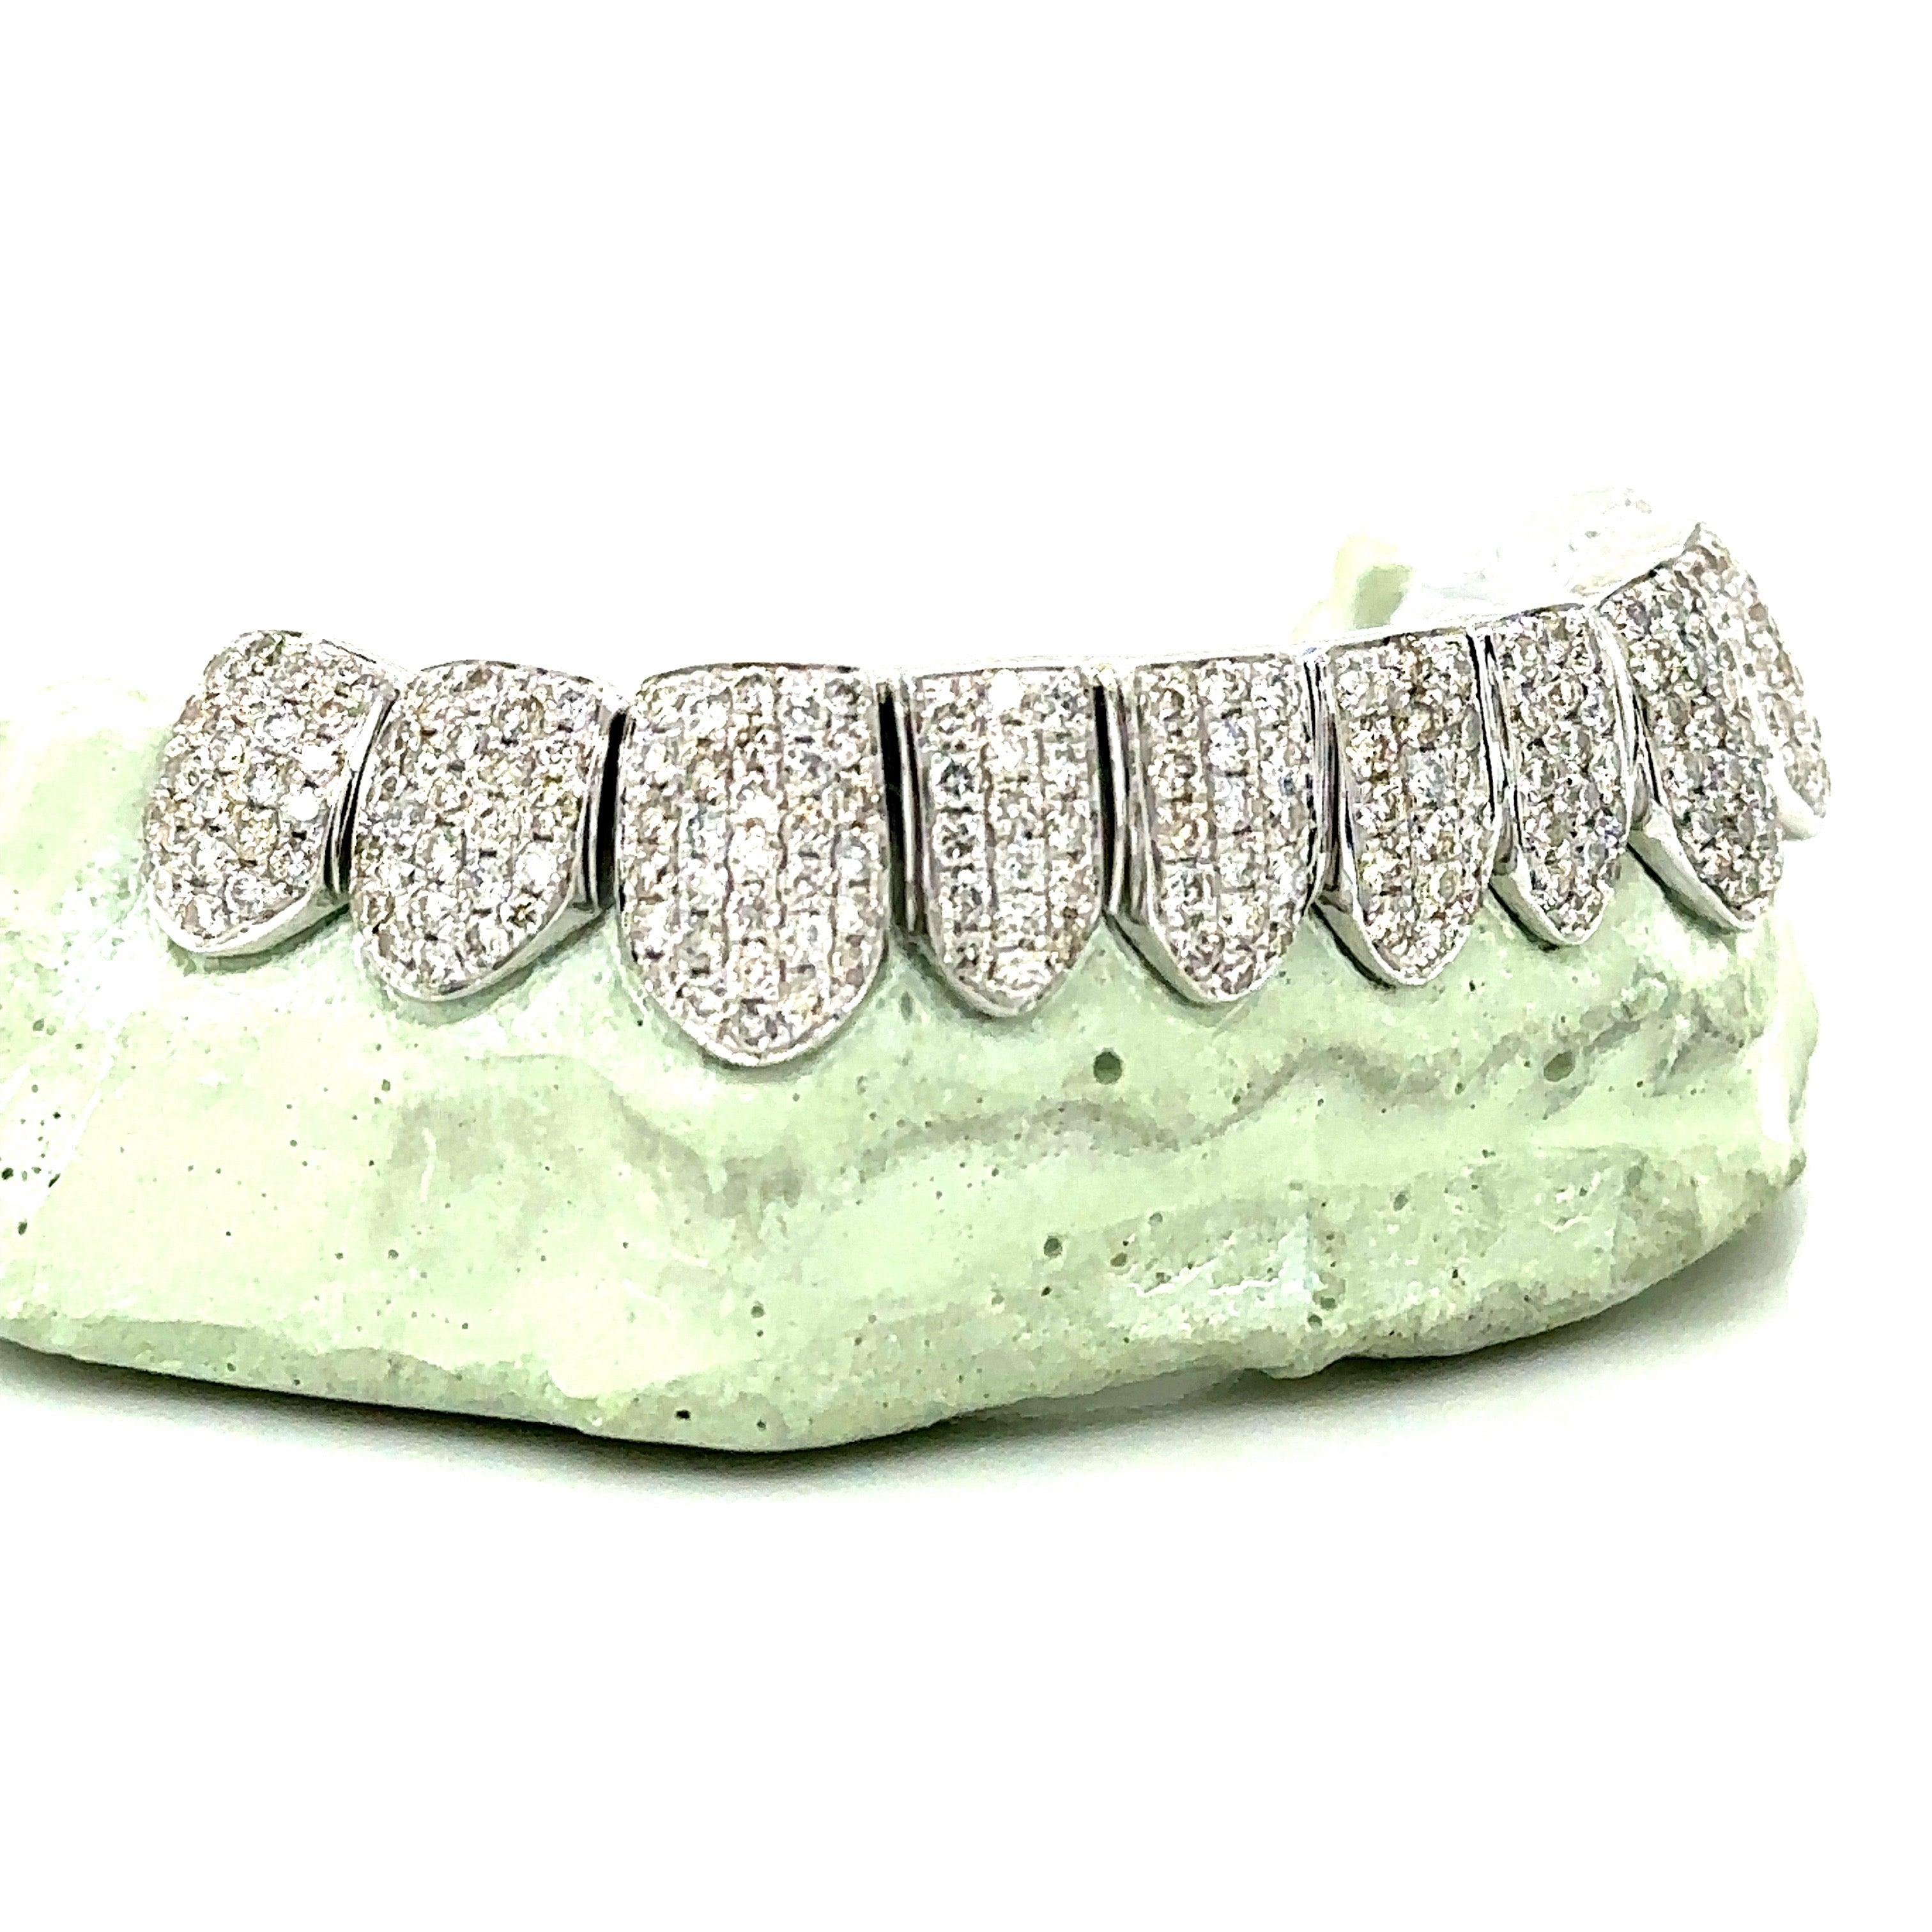 10pc White Gold Honeycomb Bottom Grillz - Seattle Gold Grillz